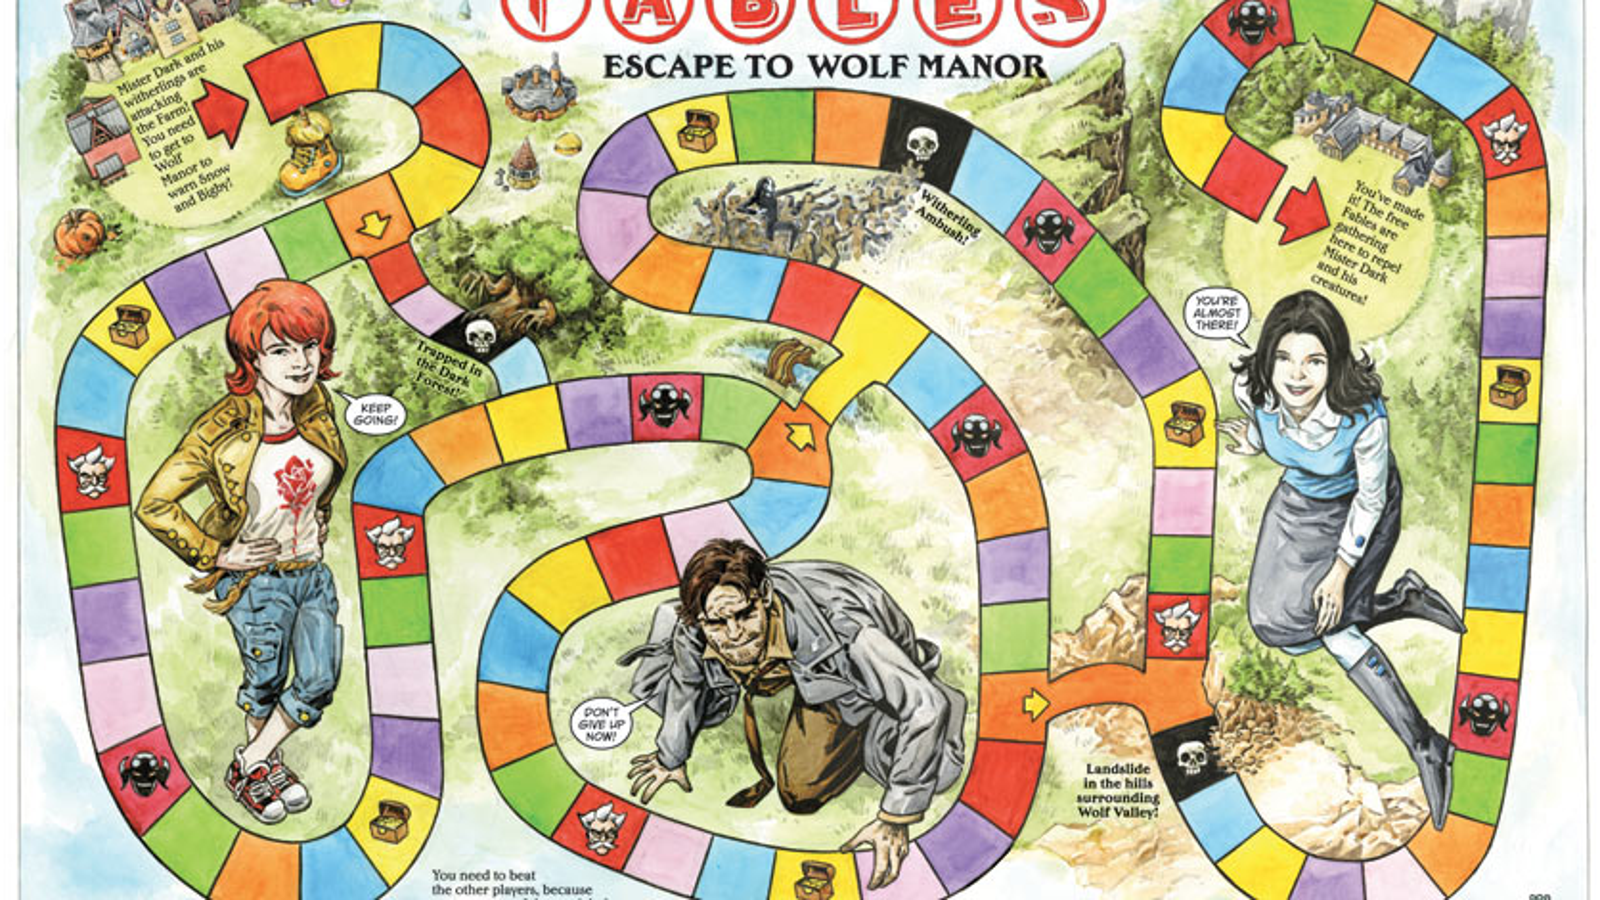 Fables, Vol. 18 by Bill Willingham